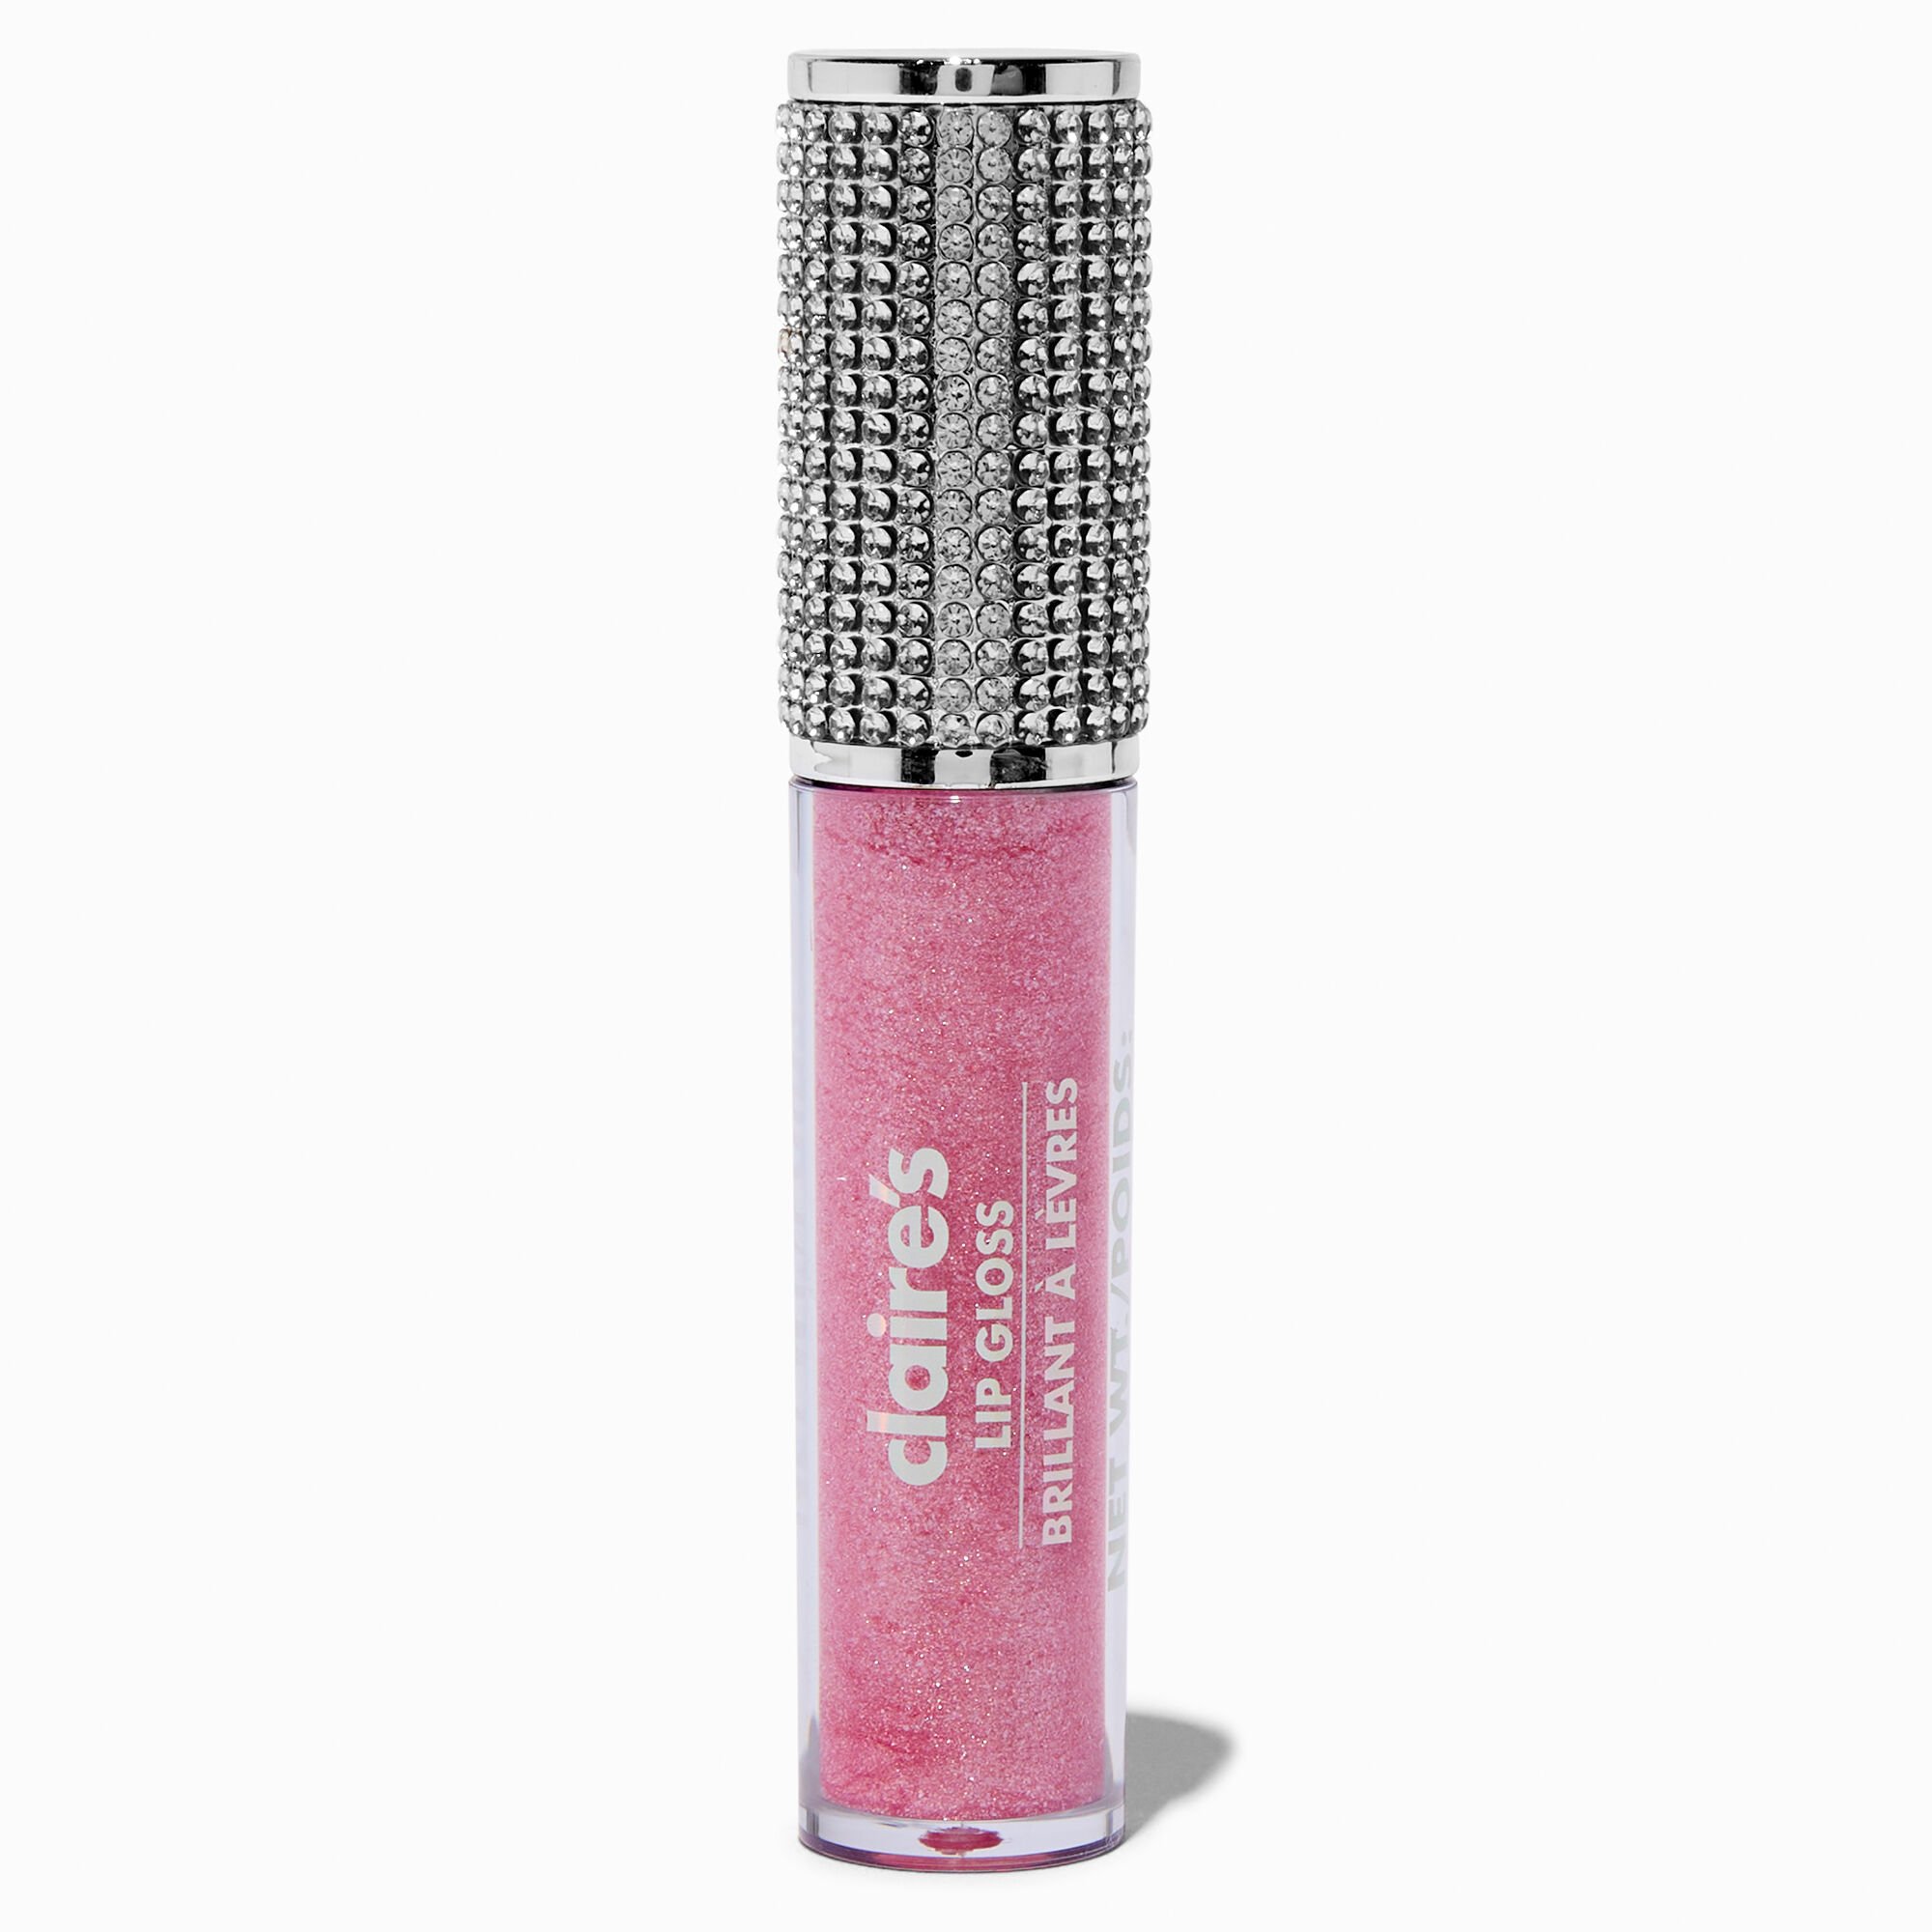 View Claires Shimmer Bling Glitter Lip Gloss Wand Pink information